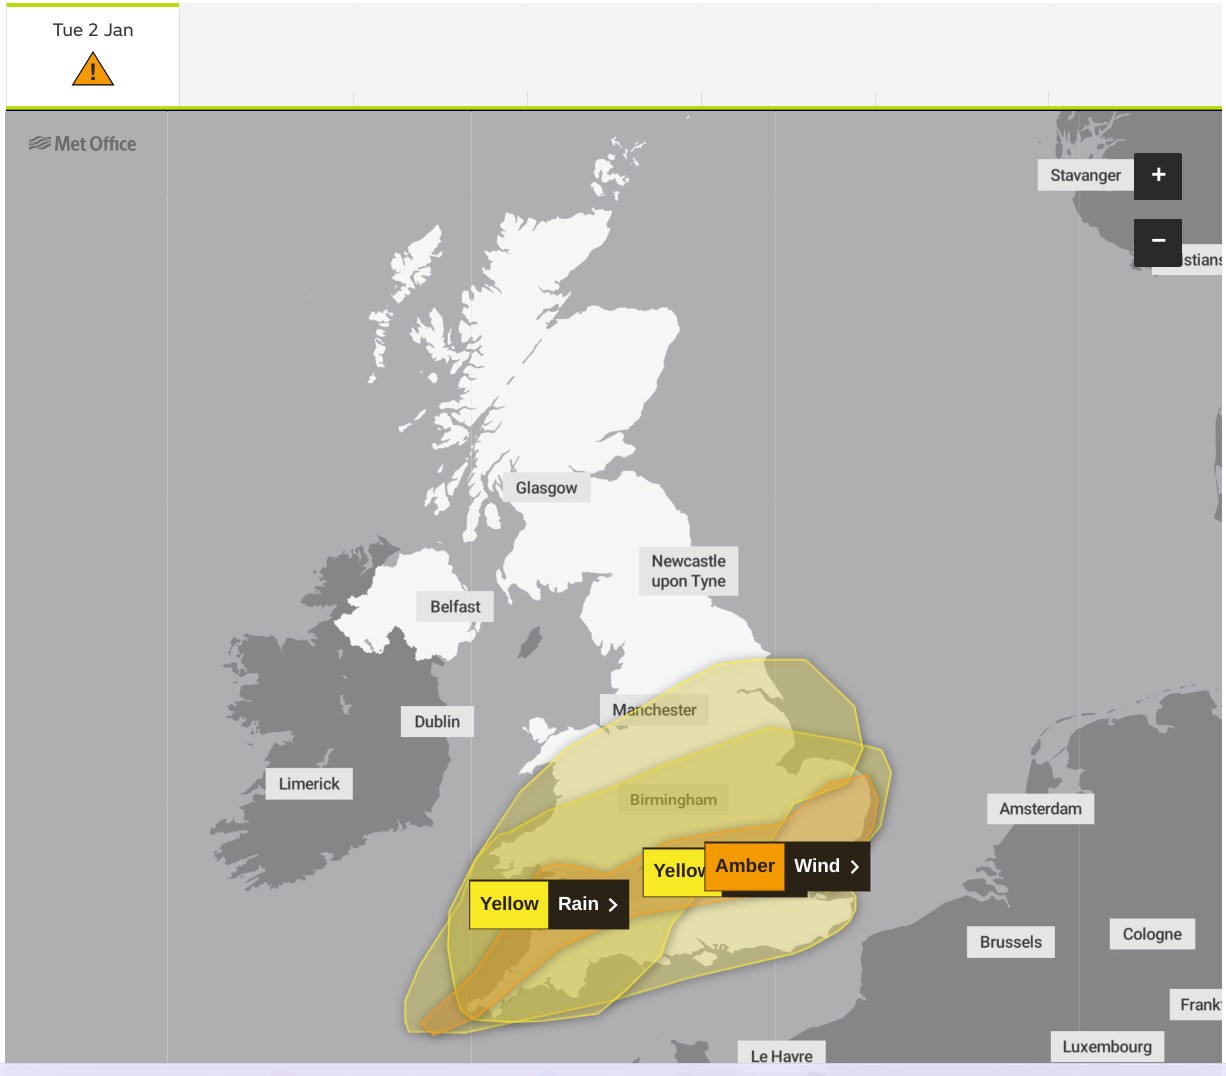 Met Office warnings for Tuesday 2nd January